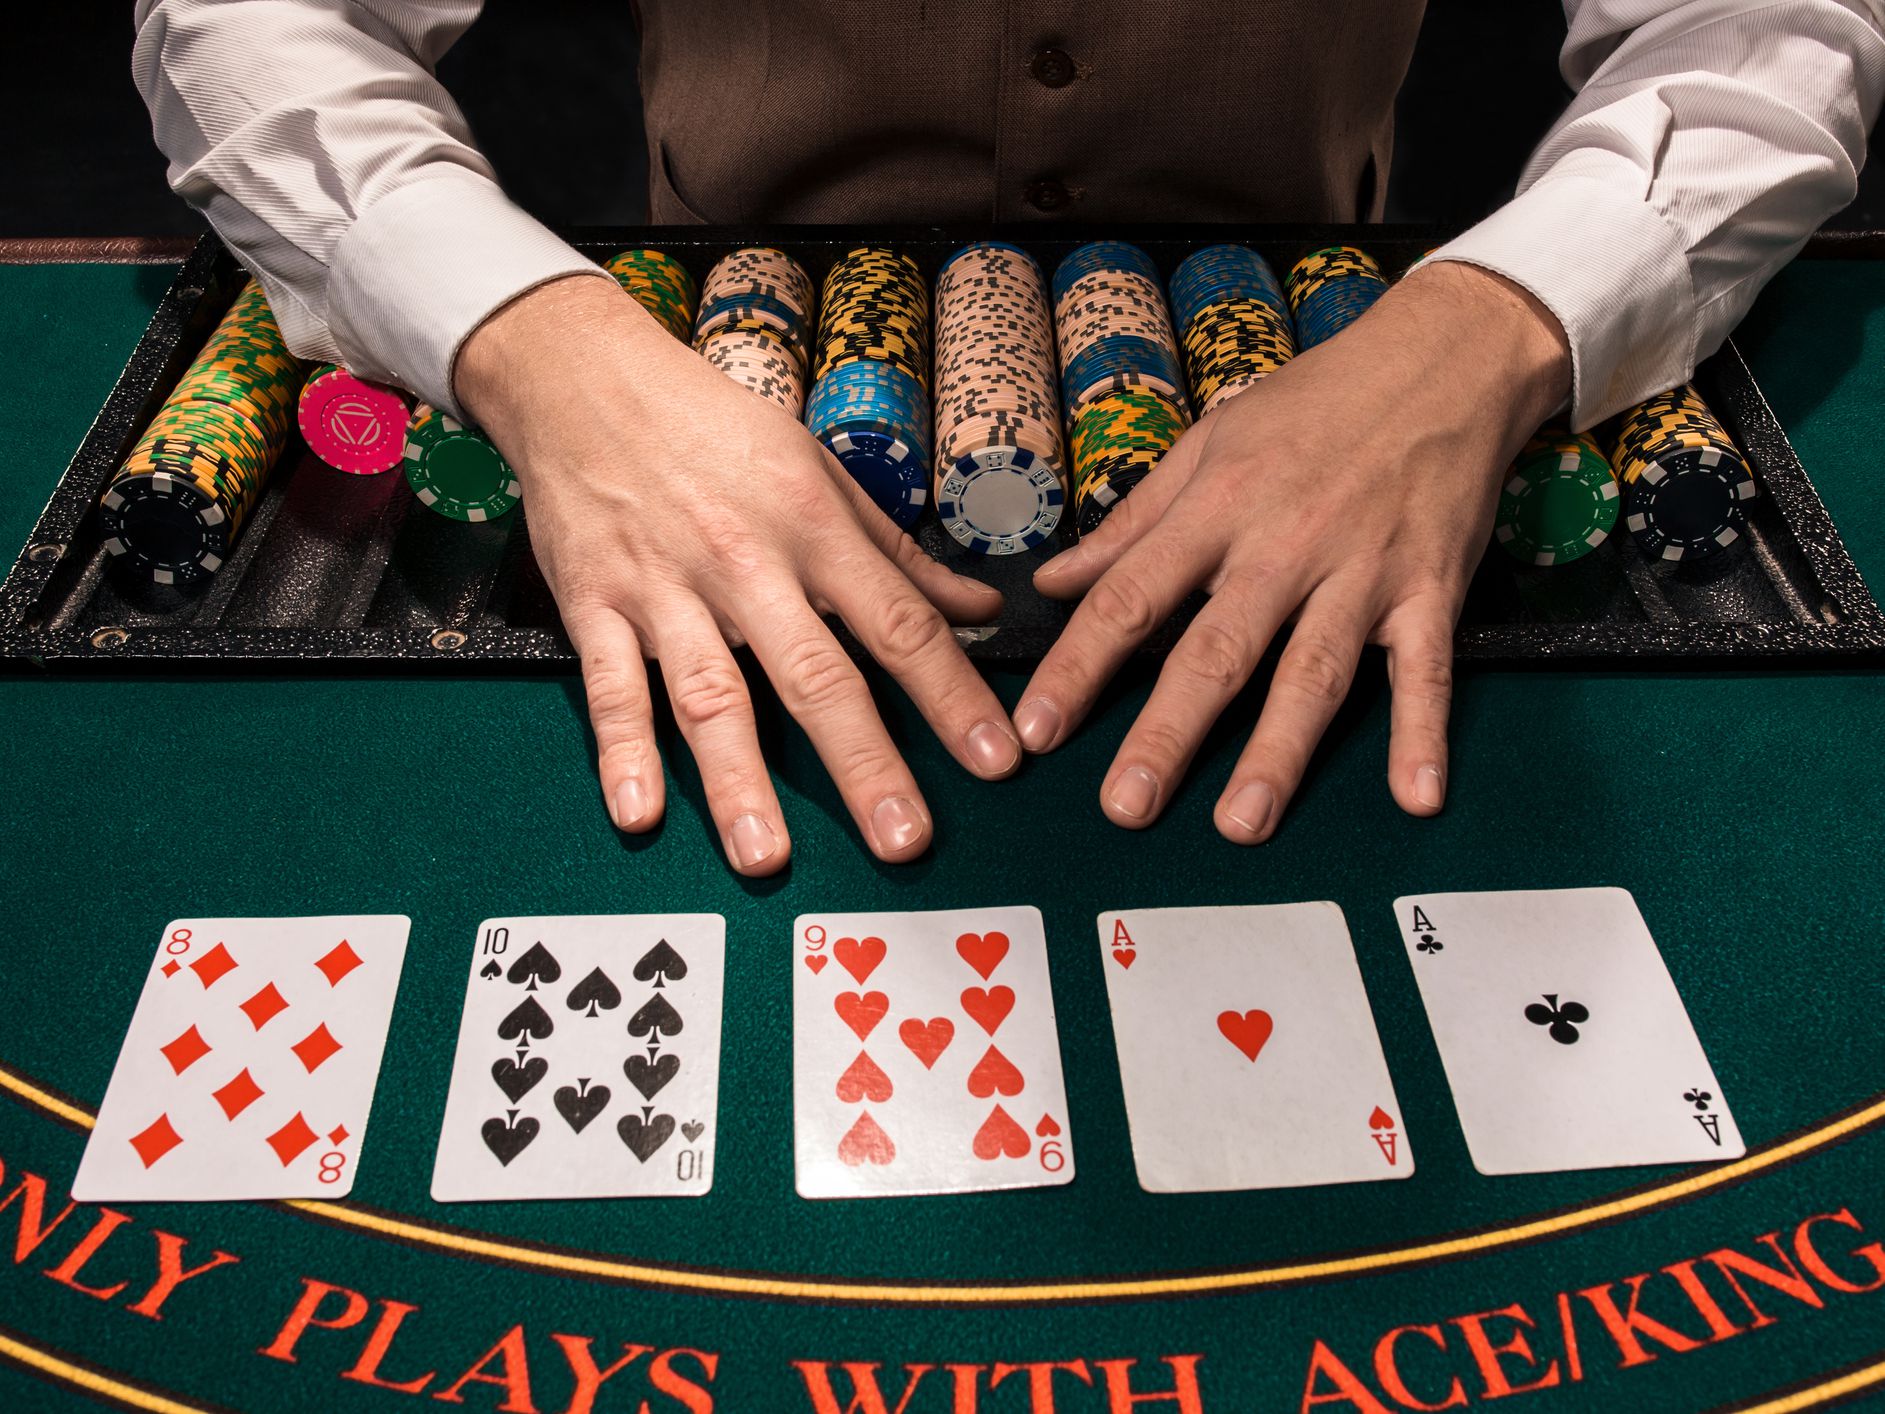 Instructions to Transition, The incredible round of poker is tied in with deciding. check or raise, continuously going with choices in light of the data on the board, key factors, your table position.